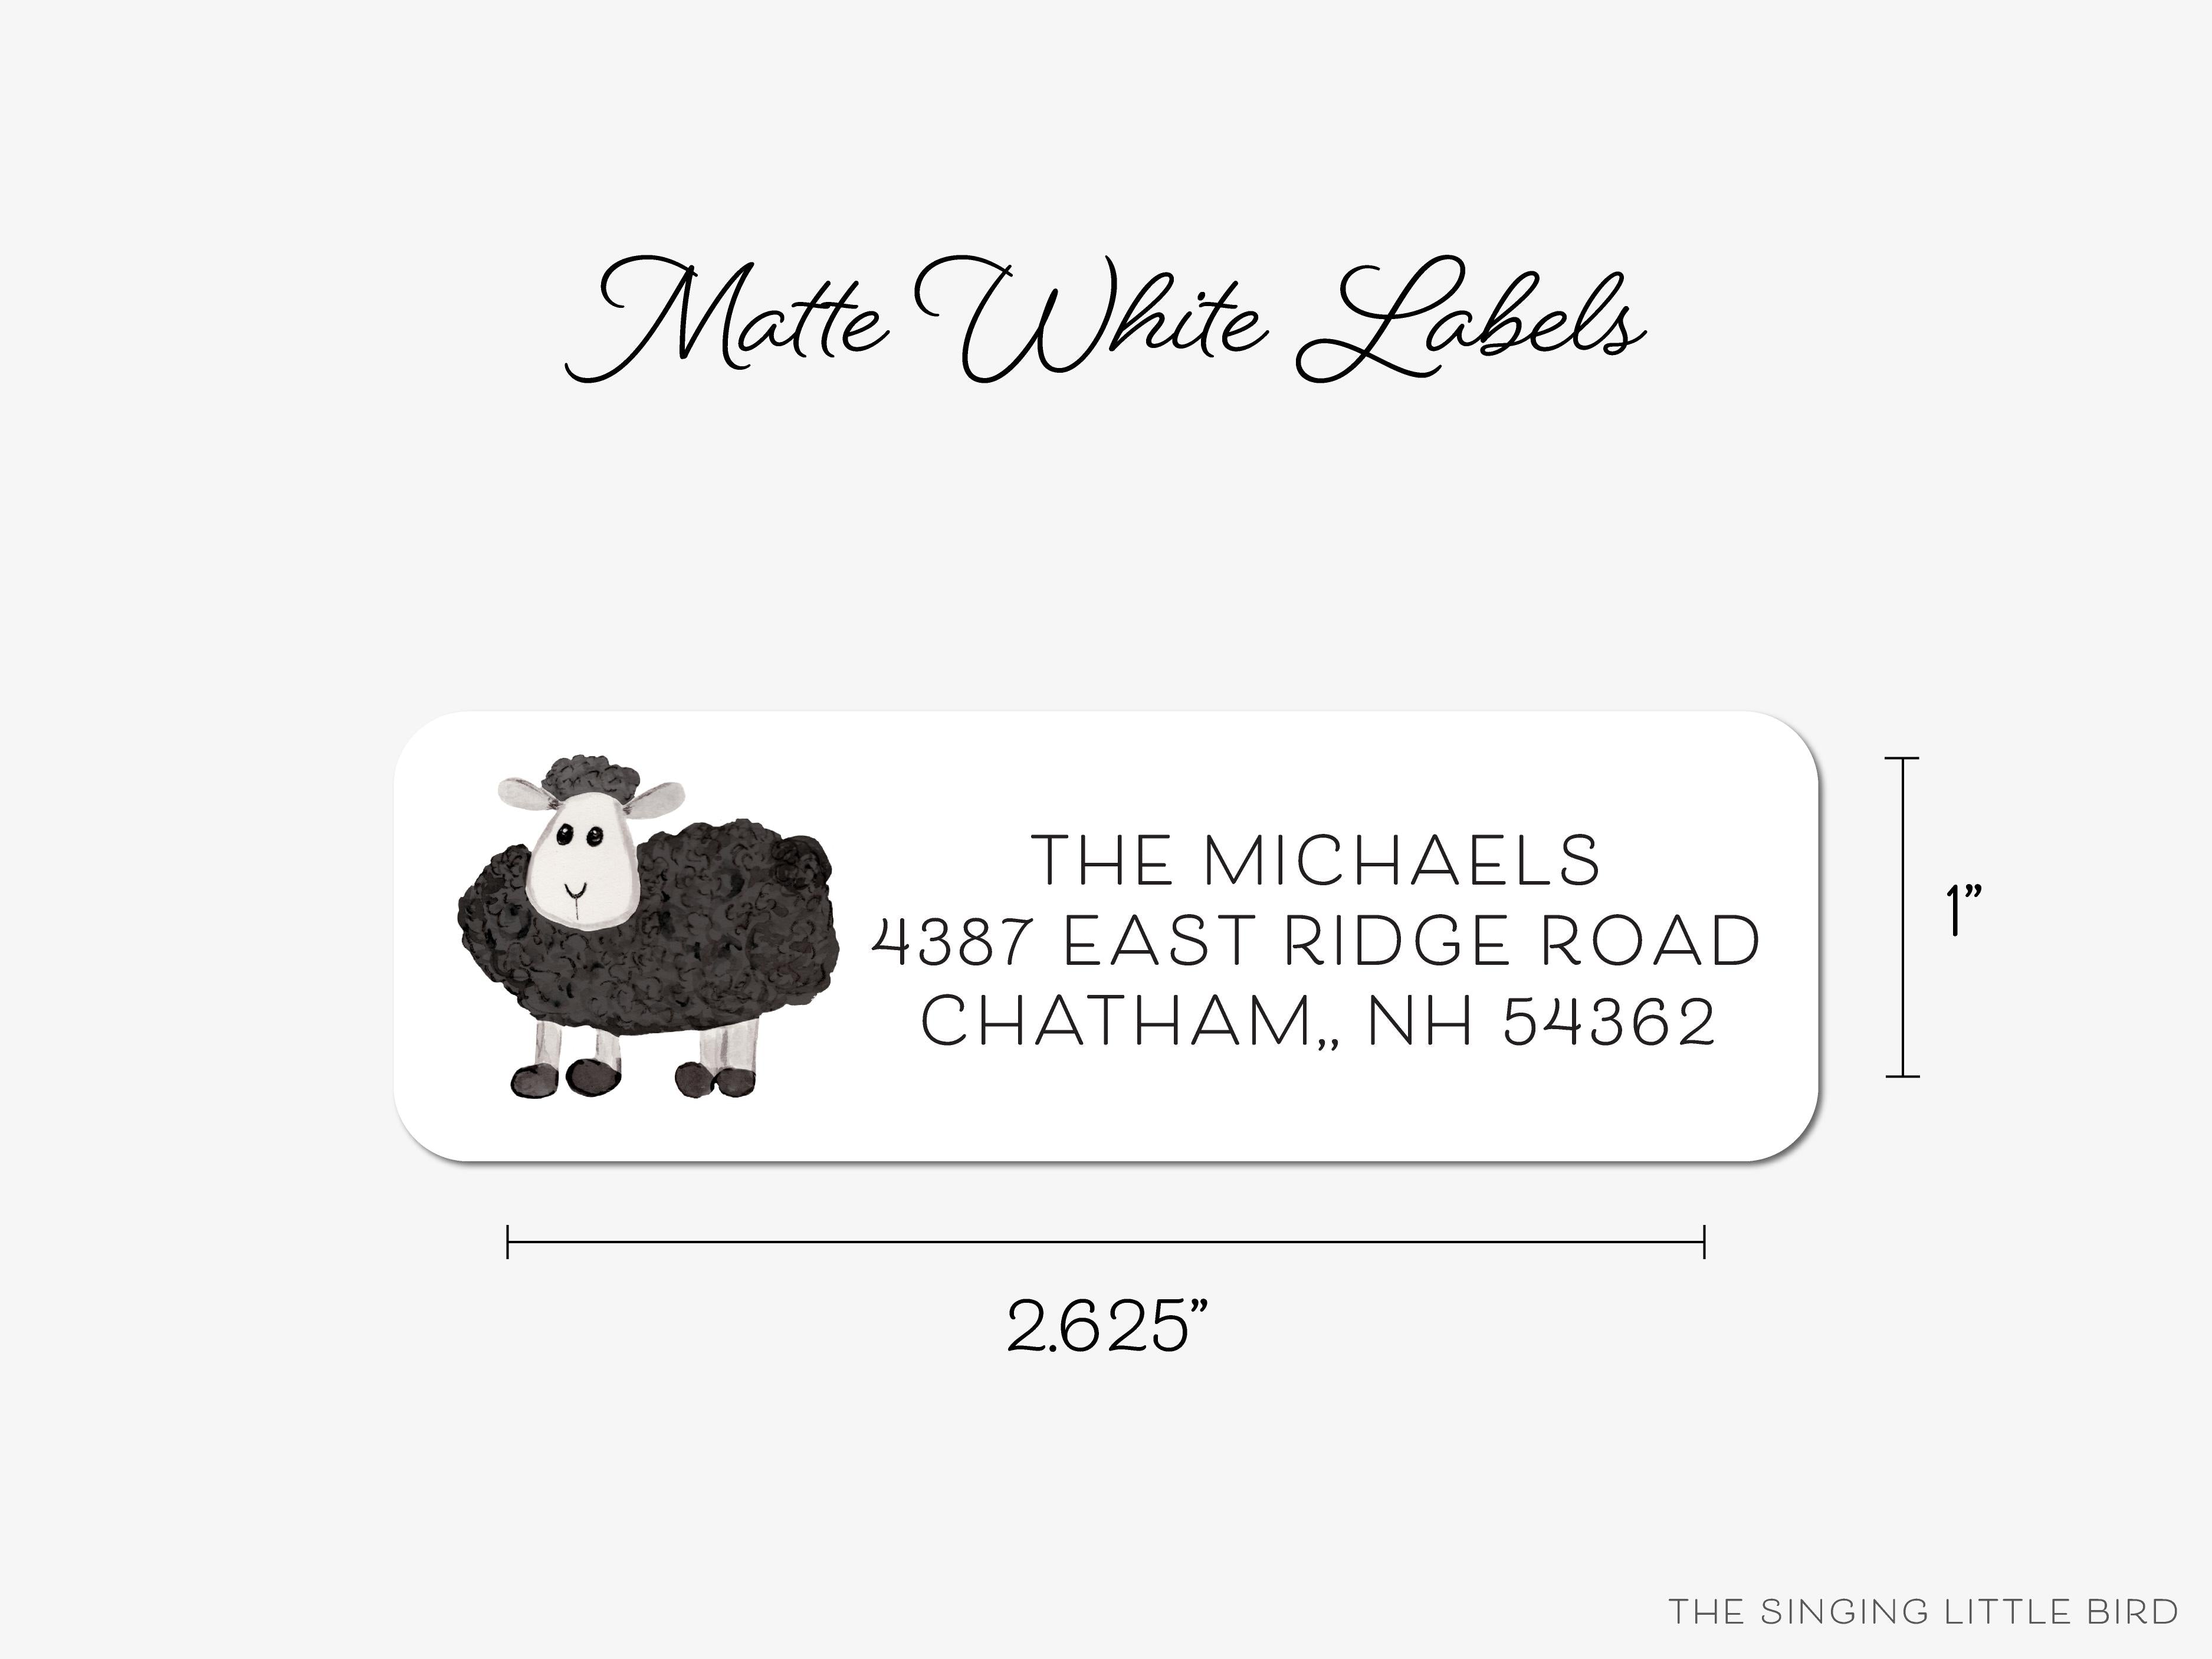 Black Sheep Return Address Labels- These personalized return address labels are 2.625" x 1" and feature our hand-painted watercolor sheep, printed in the USA on beautiful matte finish labels. These make great gifts for yourself or the farm animal lover. -The Singing Little Bird